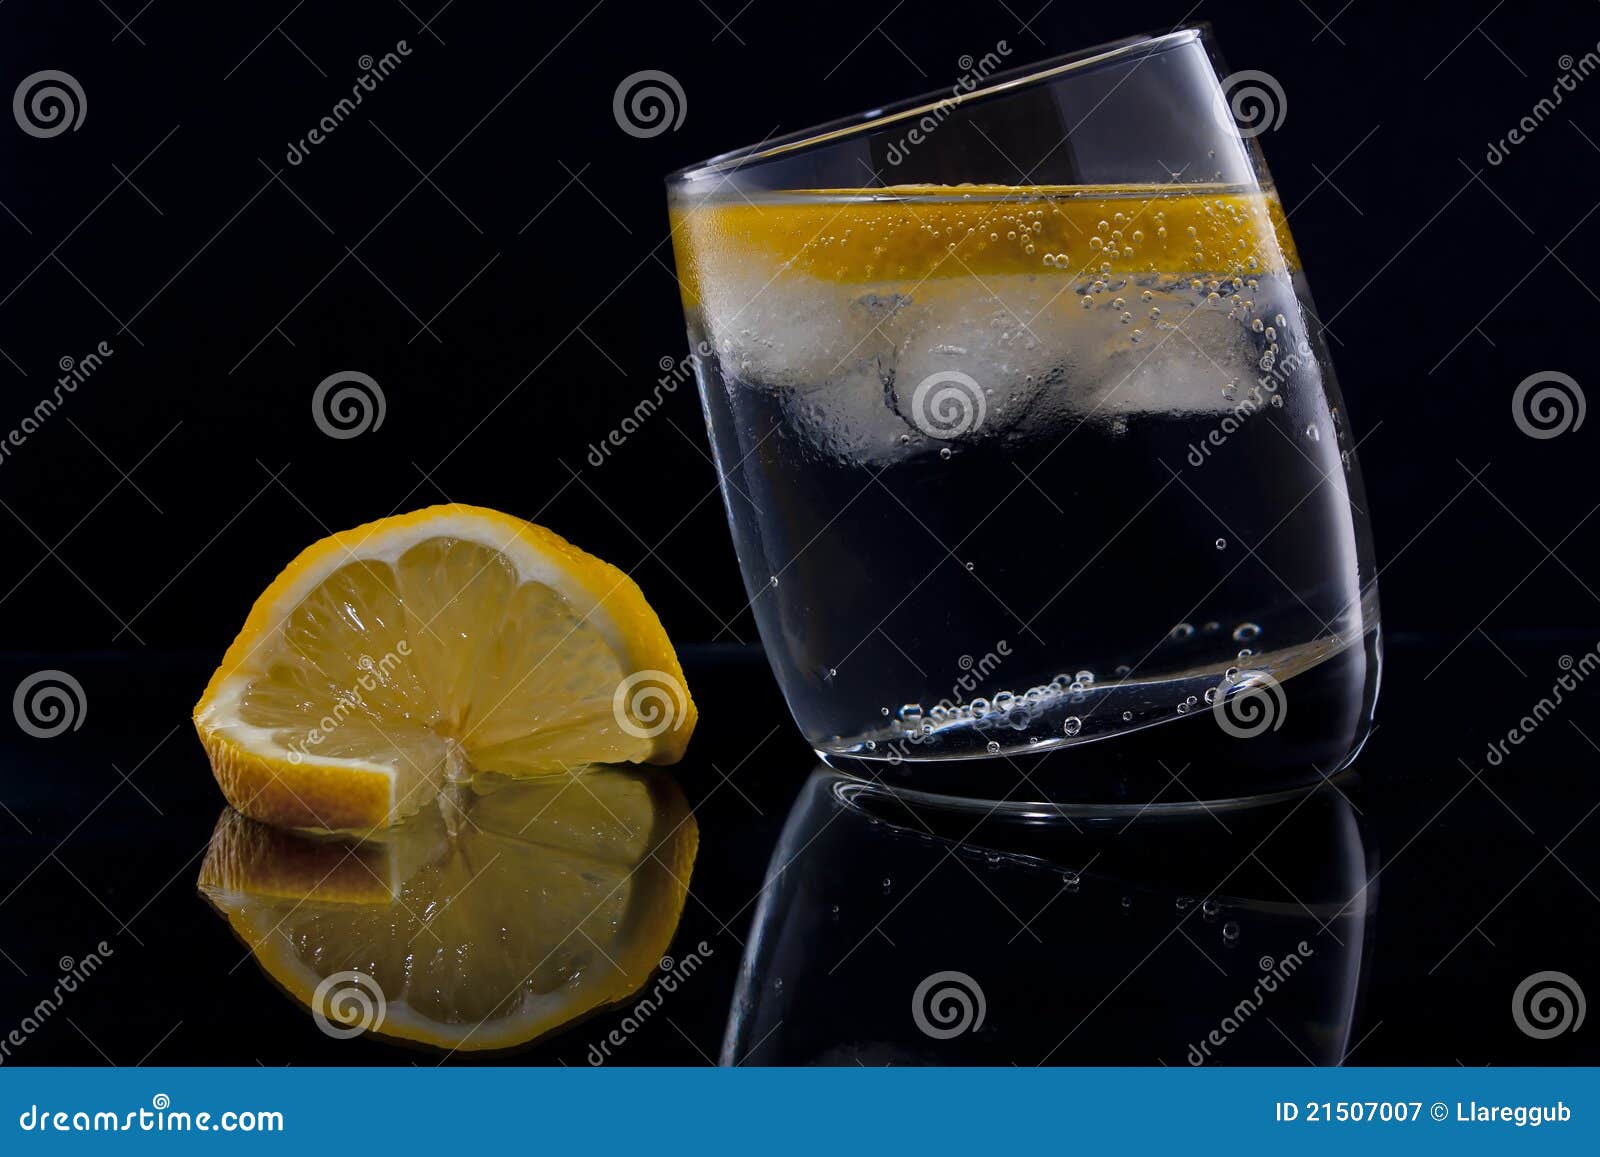 gin and tonic with a slice of lemon